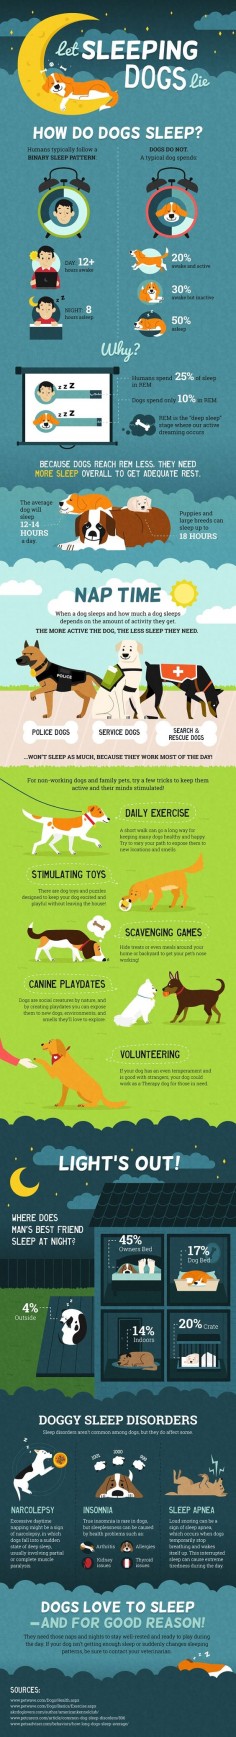 Dog Infographic: how much sleep do dogs need, let sleeping dogs lie